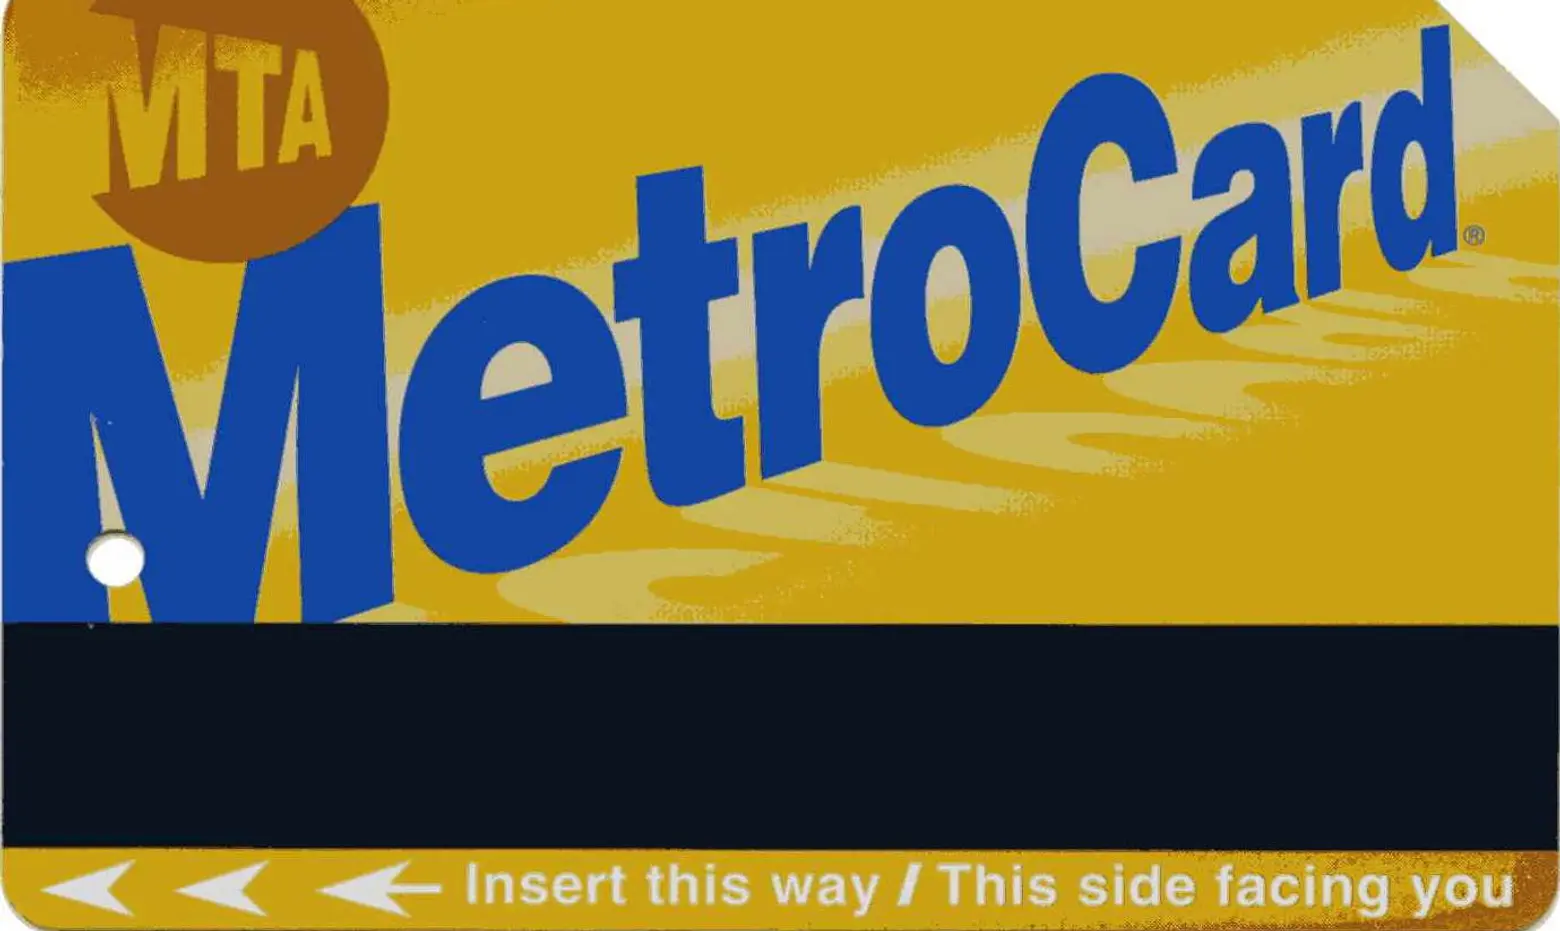 The history of the New York City MetroCard